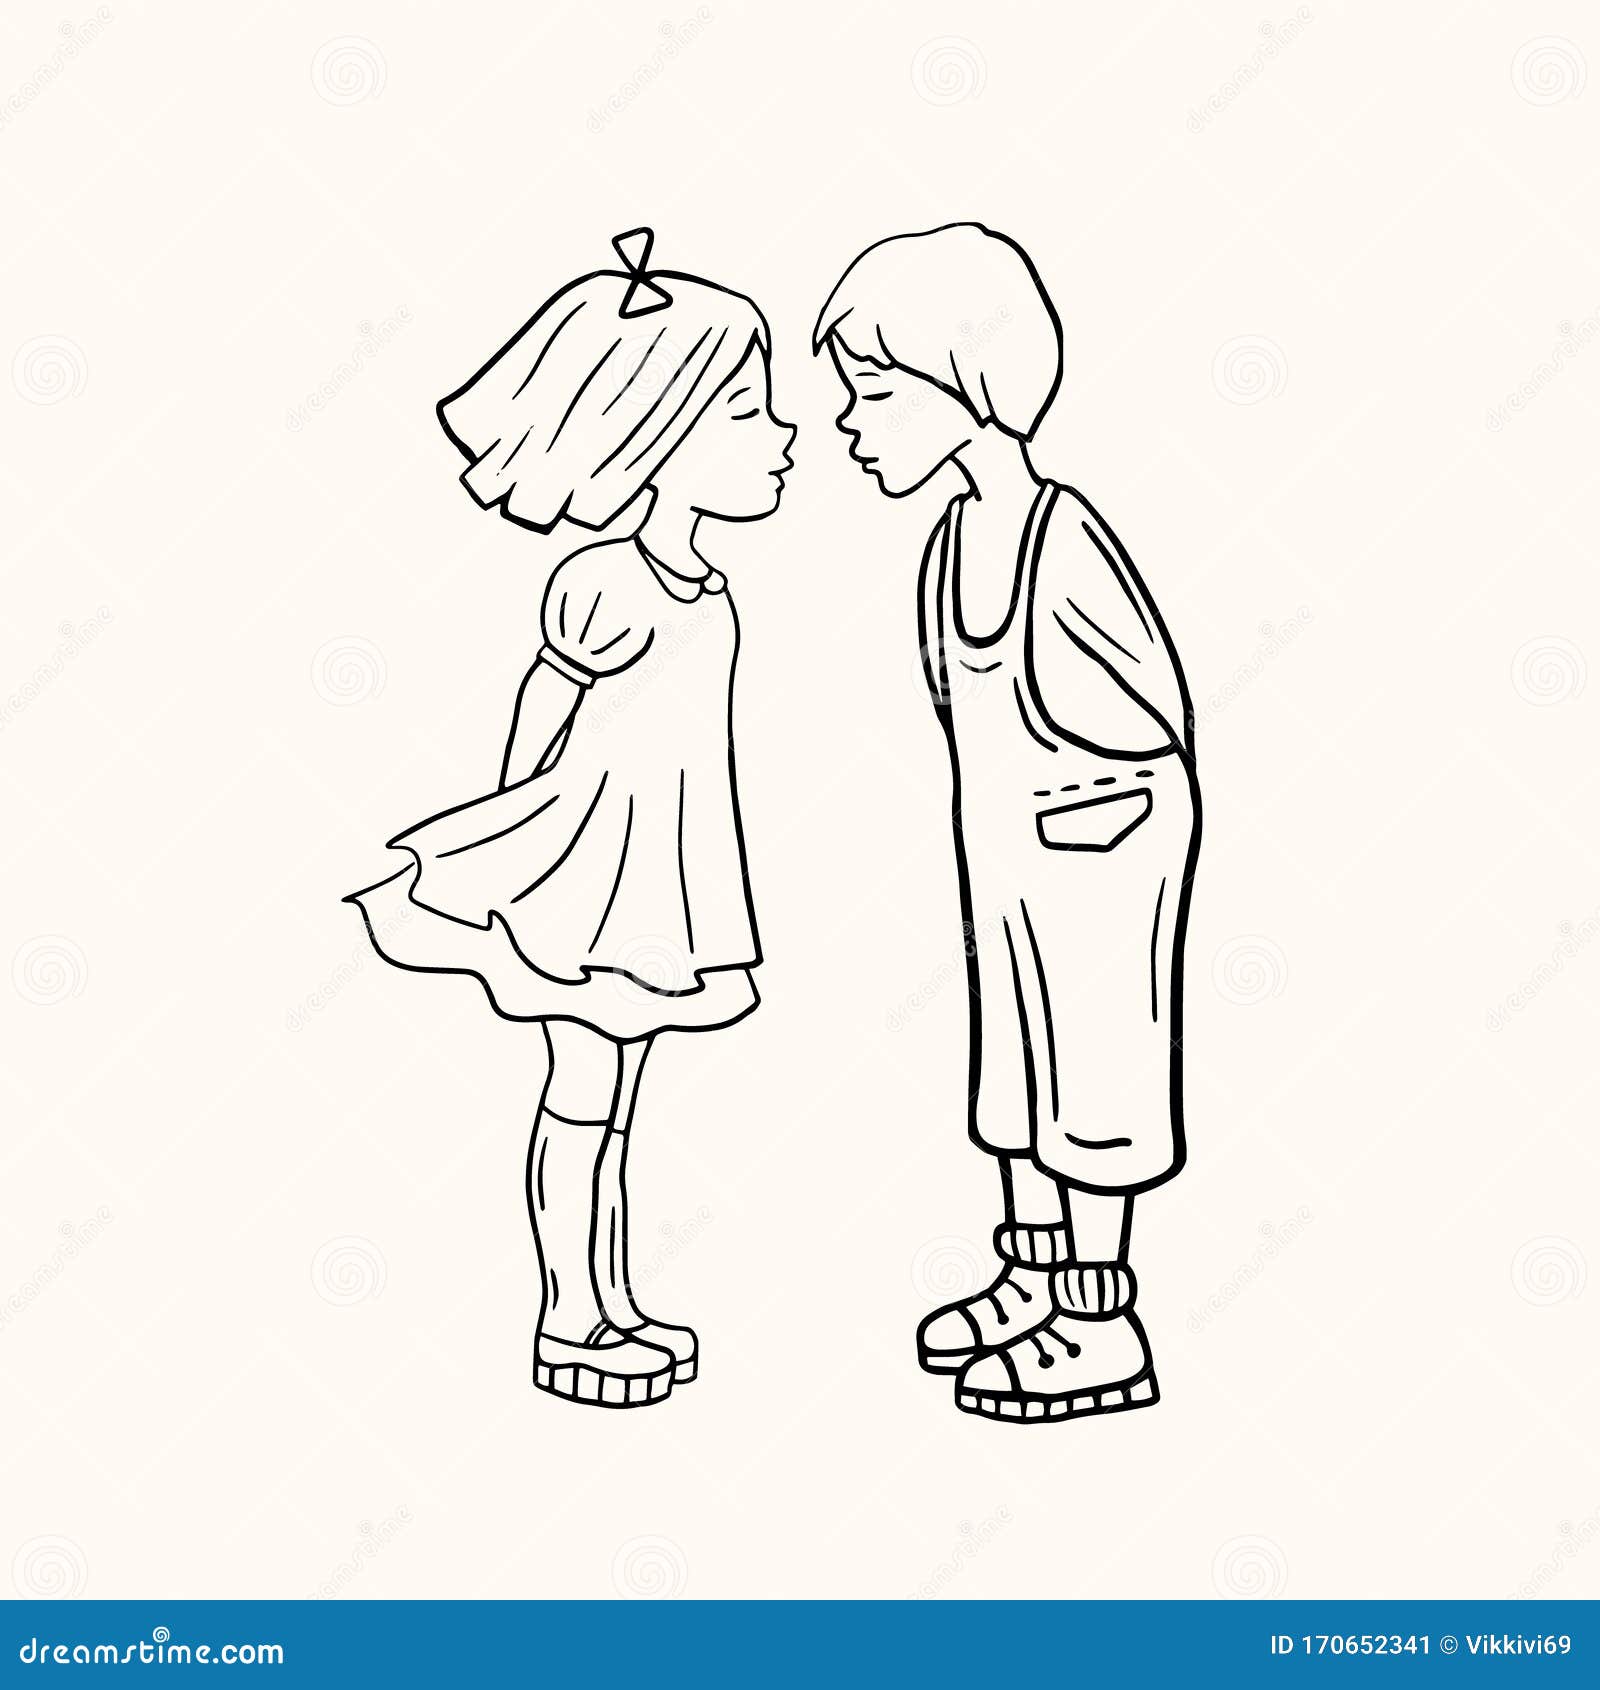 Loving Boy And Girl Kissing Lovers Loving Vector Linear Illustration Drawing People Stock Illustration Illustration Of People Friendship